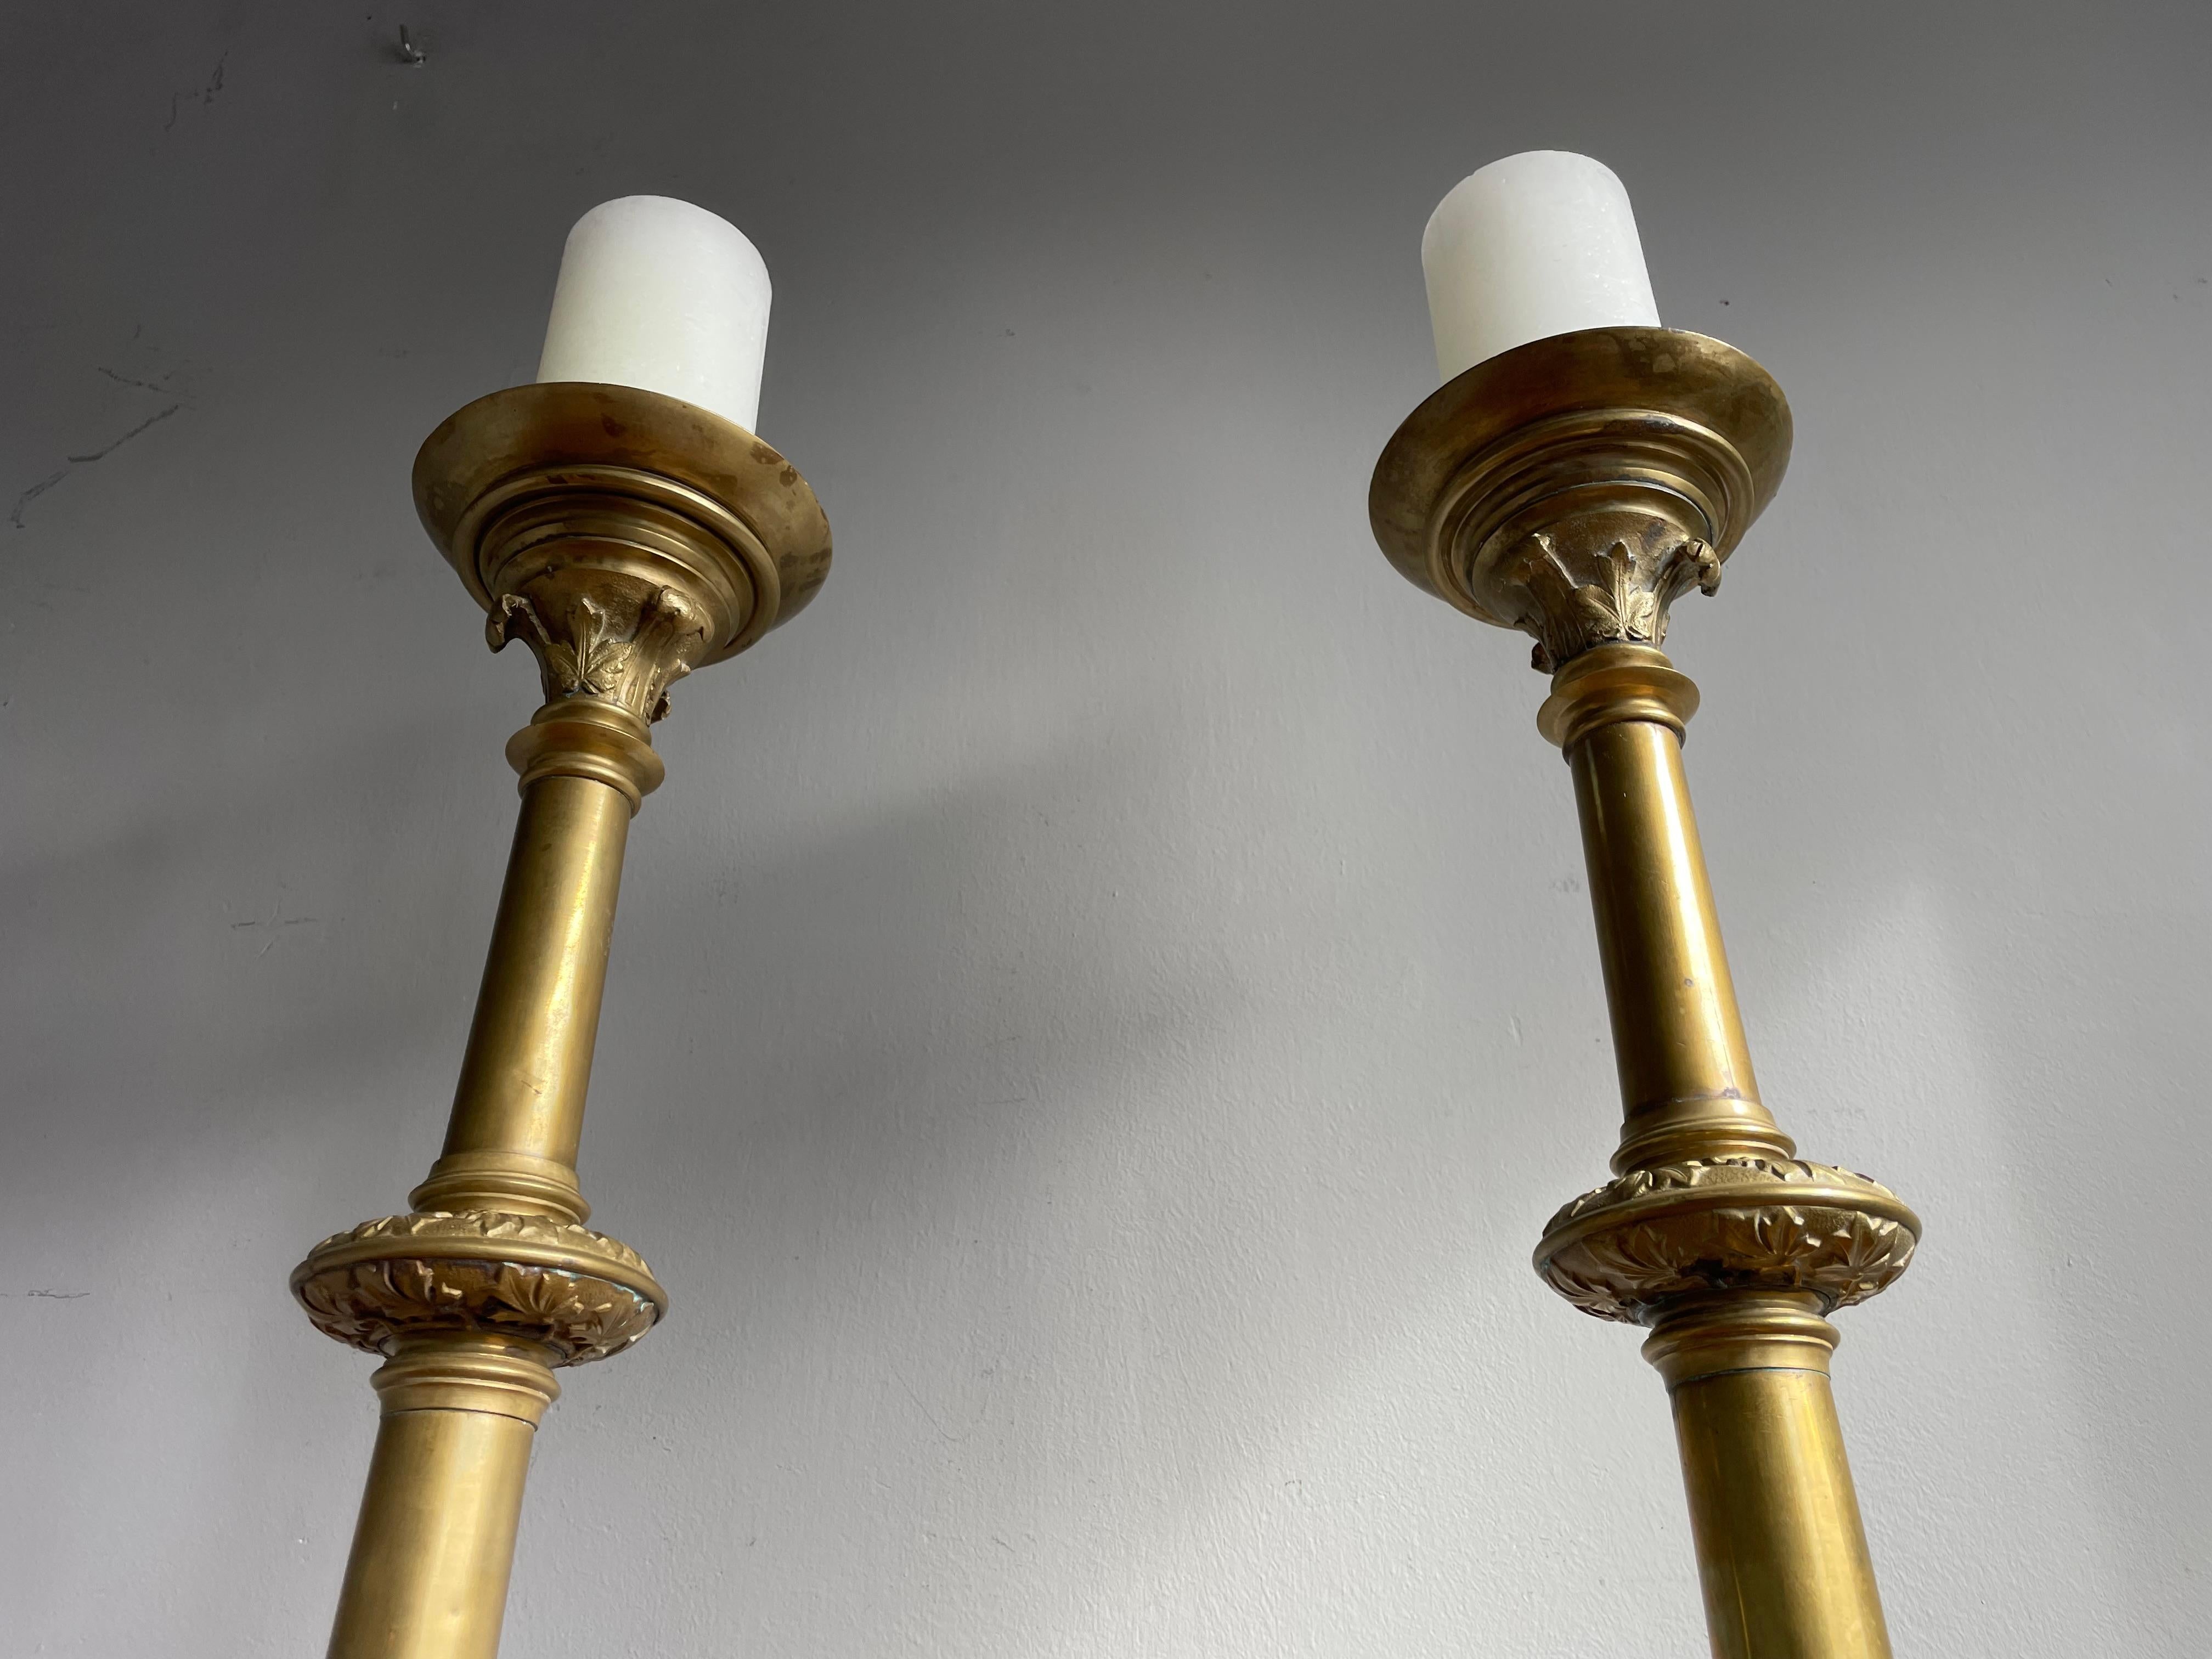 19th Century Antique Pair of Bronze Gothic Revival Church Altar Candlesticks / Candle Holders For Sale